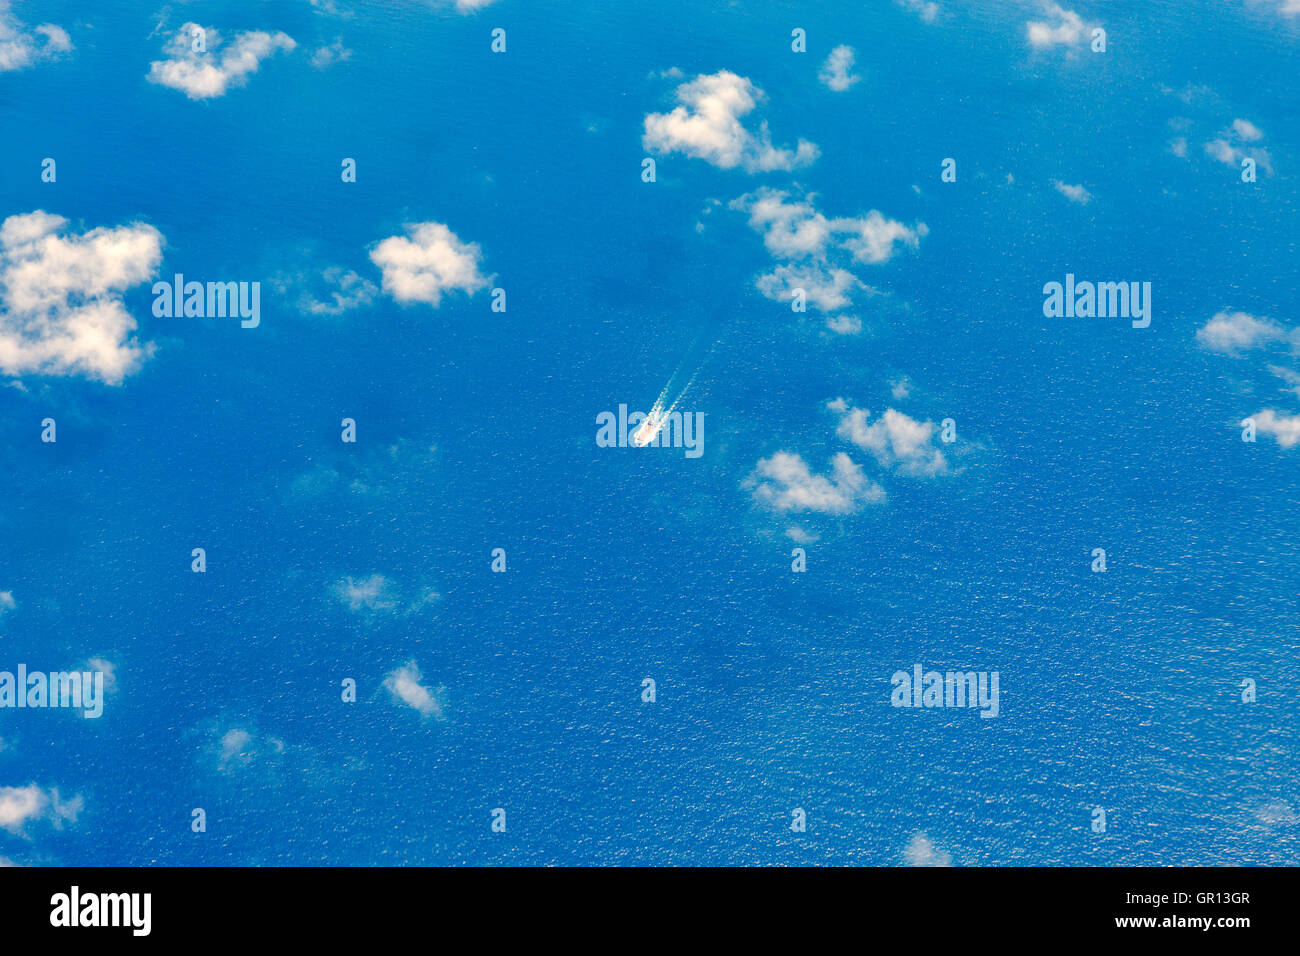 Mediterranean Sea view from airplane above the clouds with cargo ship Stock Photo